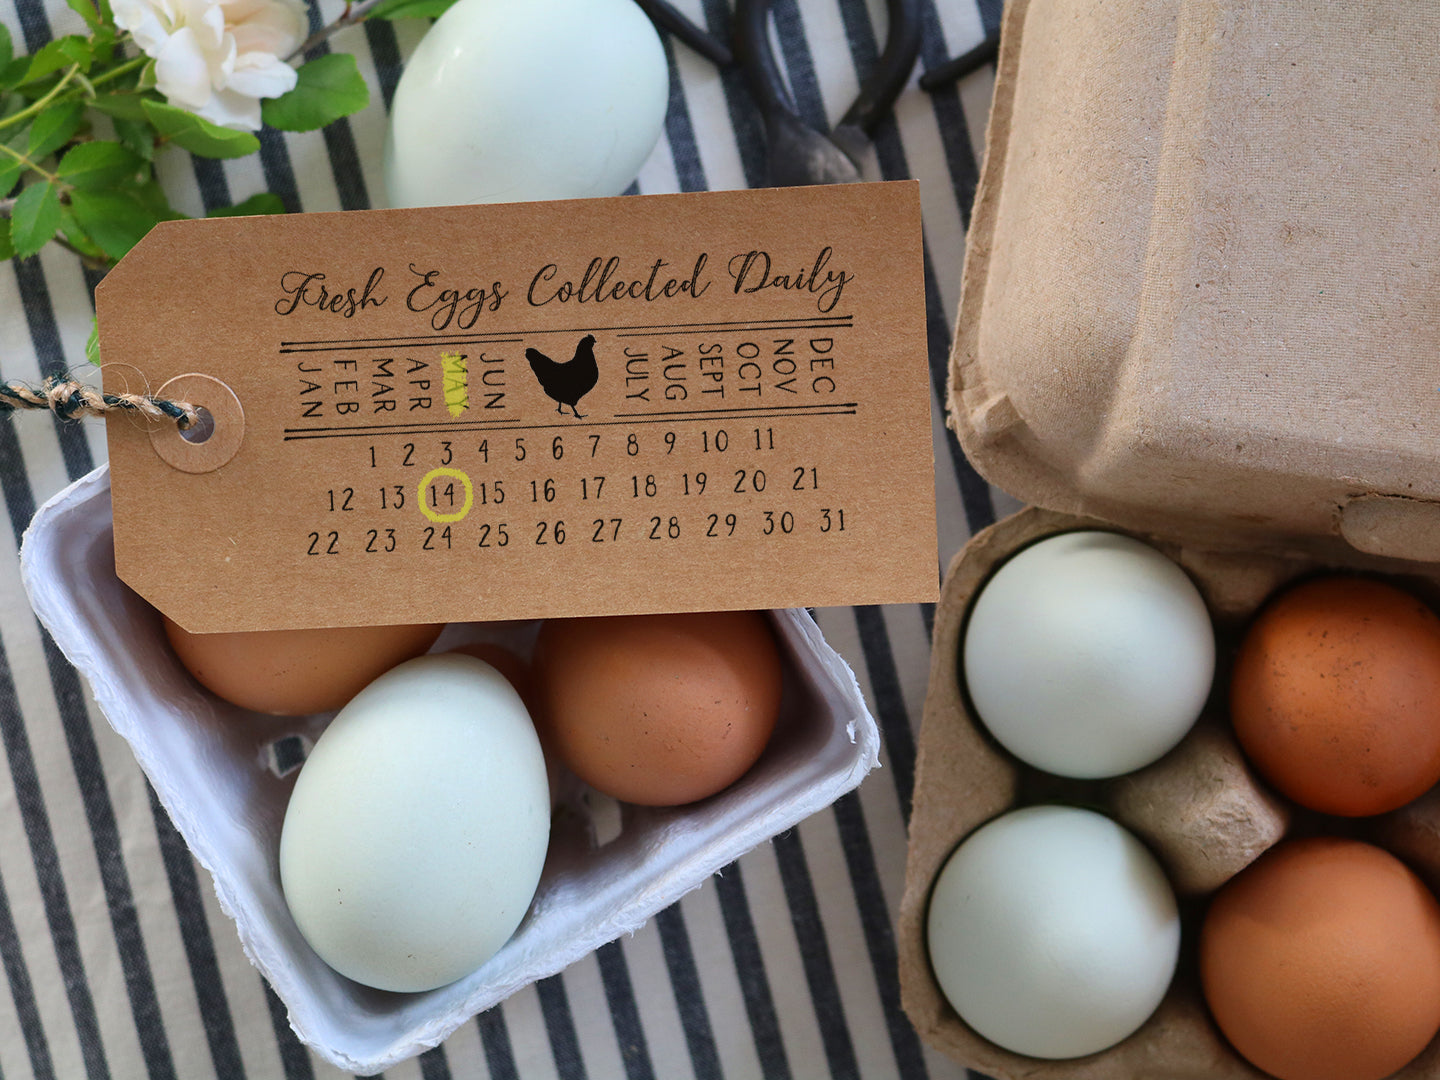  Personalized Egg Stamps for Fresh Eggs, Custom Chicken Egg Date  Stamp, Chicken Egg Stamps, Date Stamp for Eggs, Fresh Egg Stamp, Farm  Stamp, Eggs Stamp, 1 Pack of Egg Date Stamp 